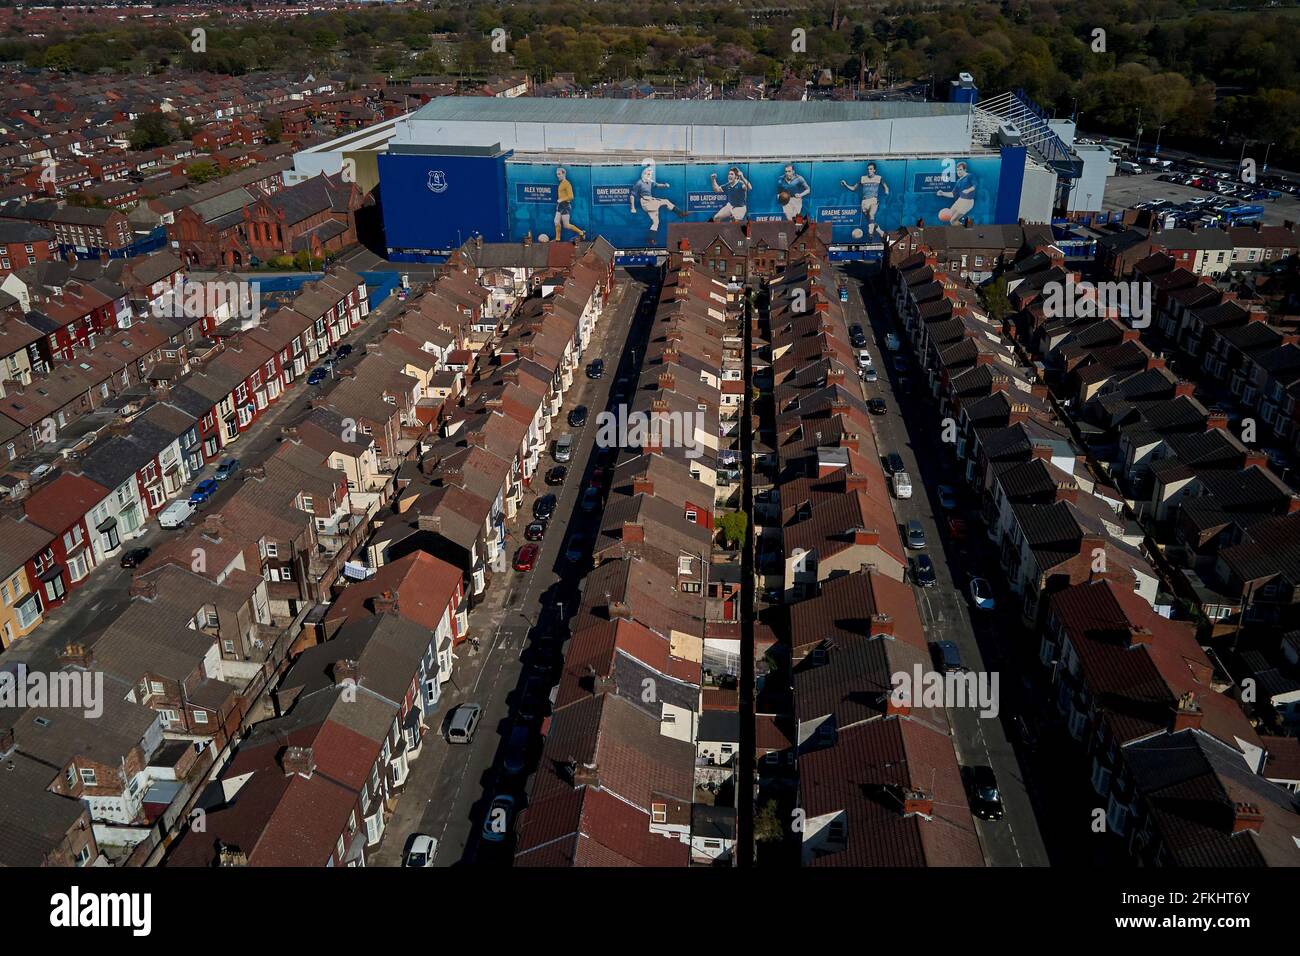 Aerial view of Goodison Park showing the stadium in it’s urban setting surrounded by residential houses Stock Photo